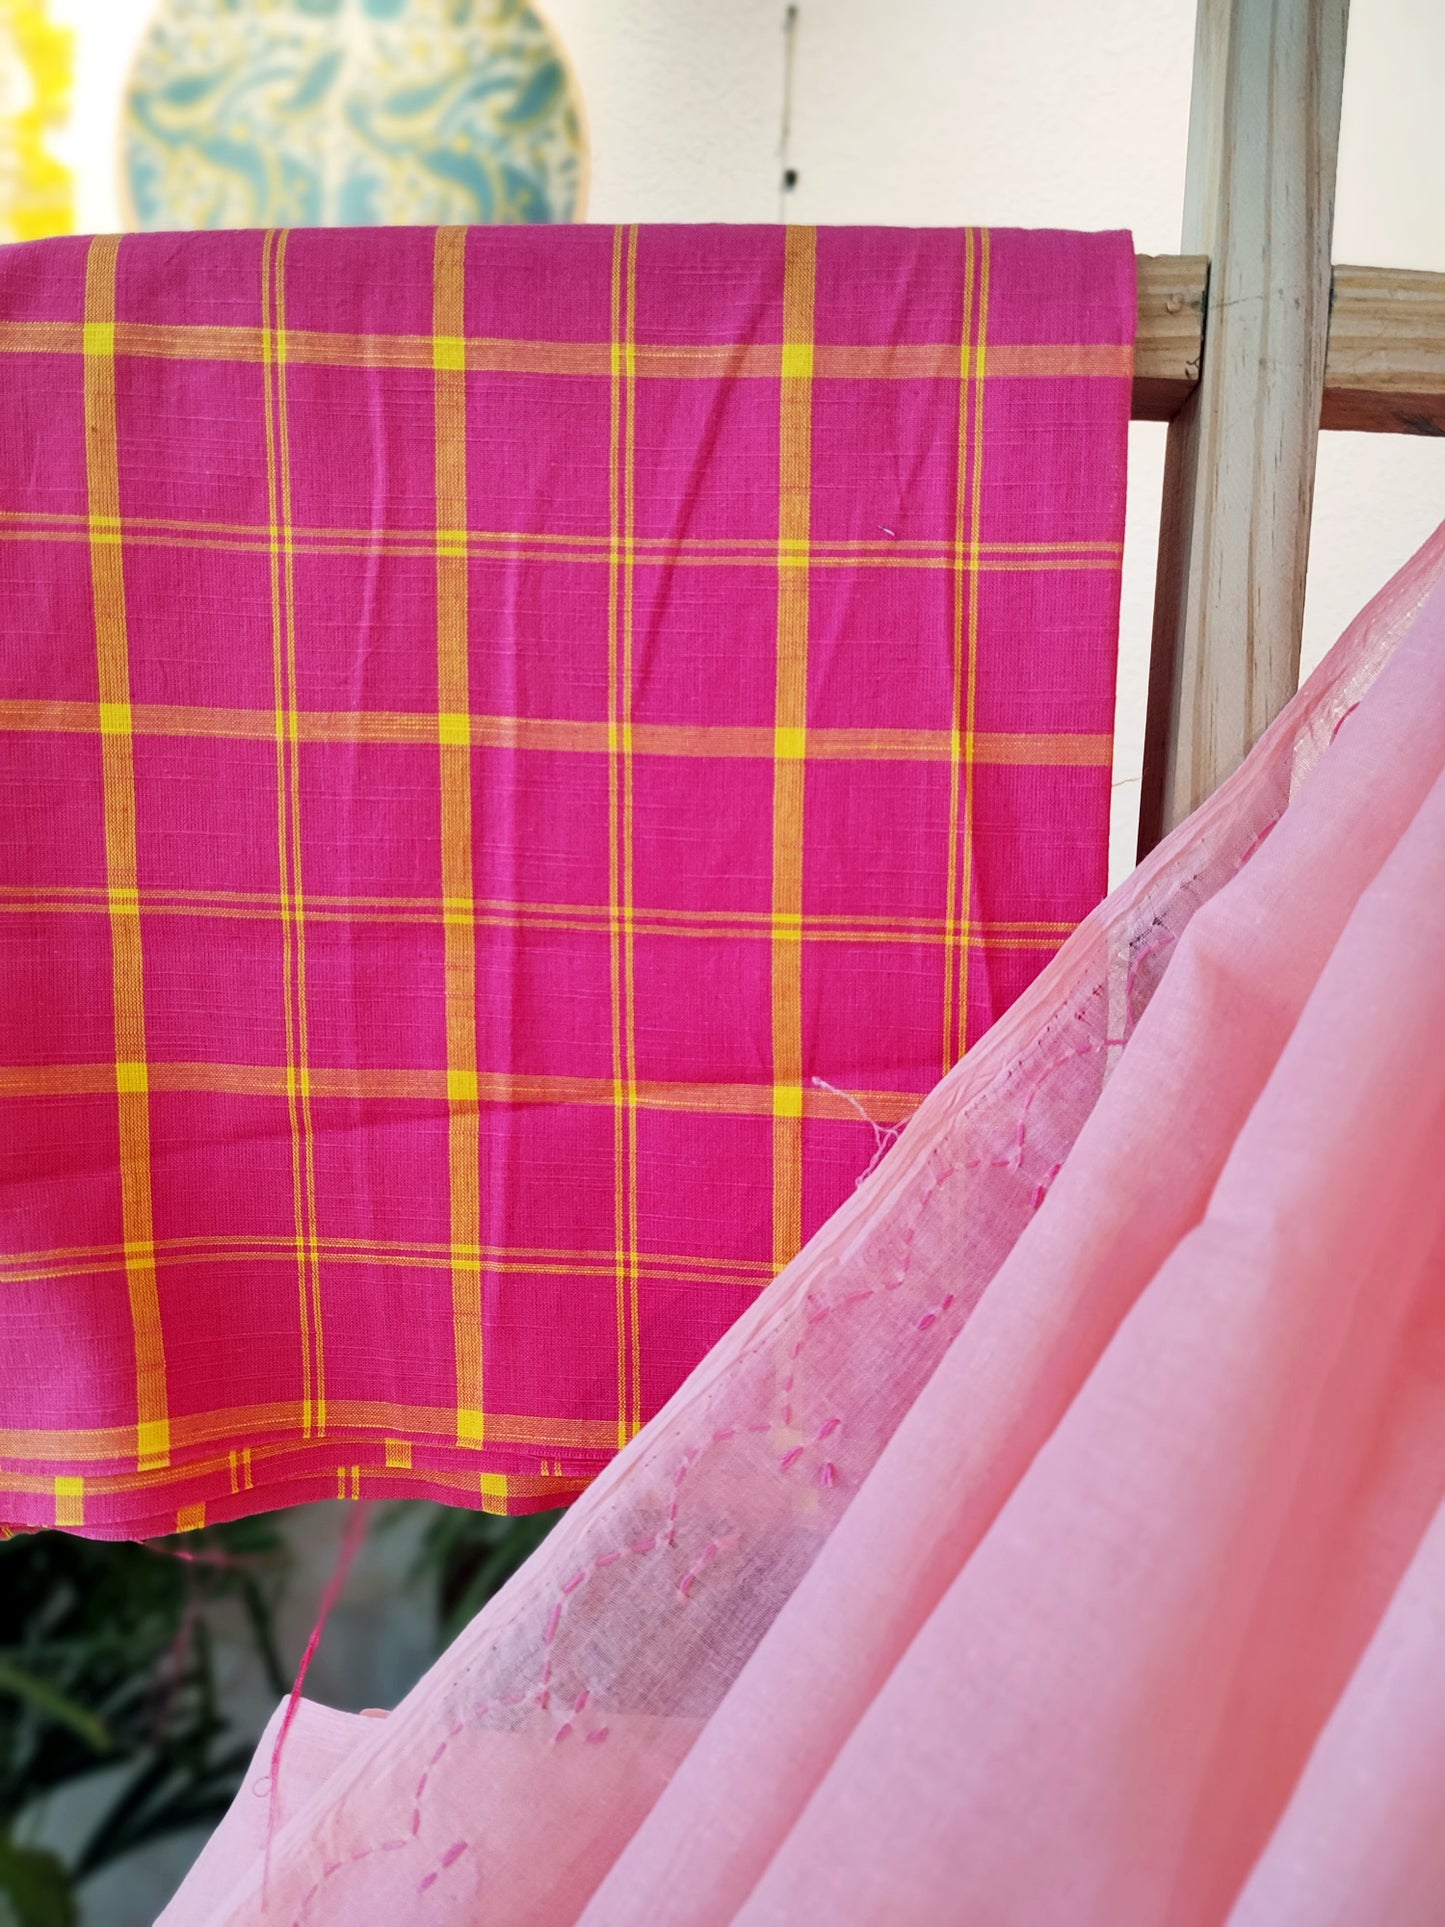 Baby Pink Cotton Voile Saree With Lucknowi Handwork With Contrast Blouse